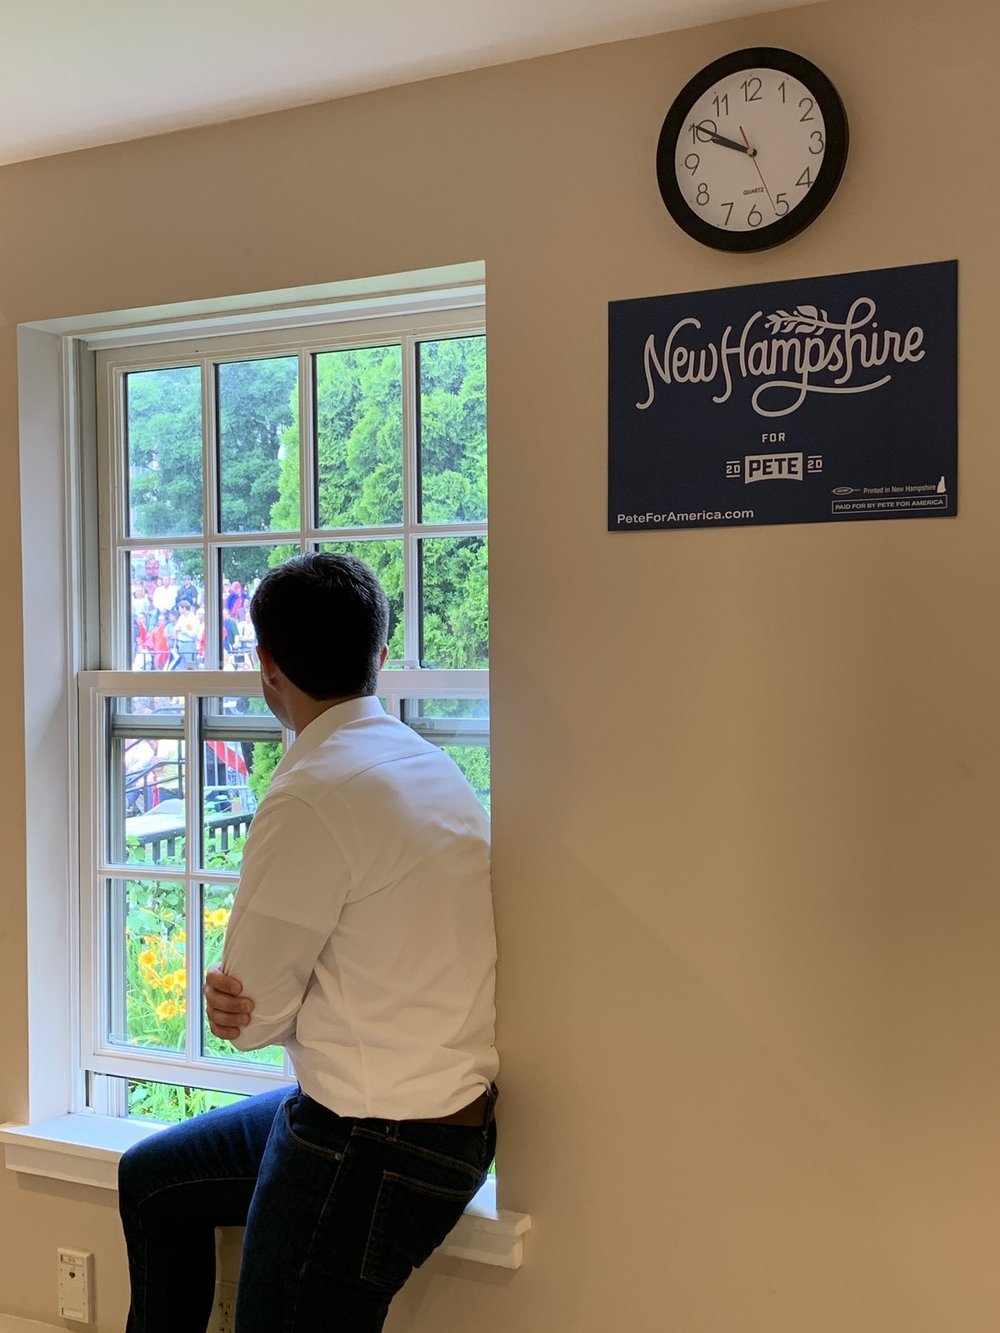  Waiting to speak, New Hampshire, Jul 13, 2019 - photo posted on Twitter by Saralena Barry. 